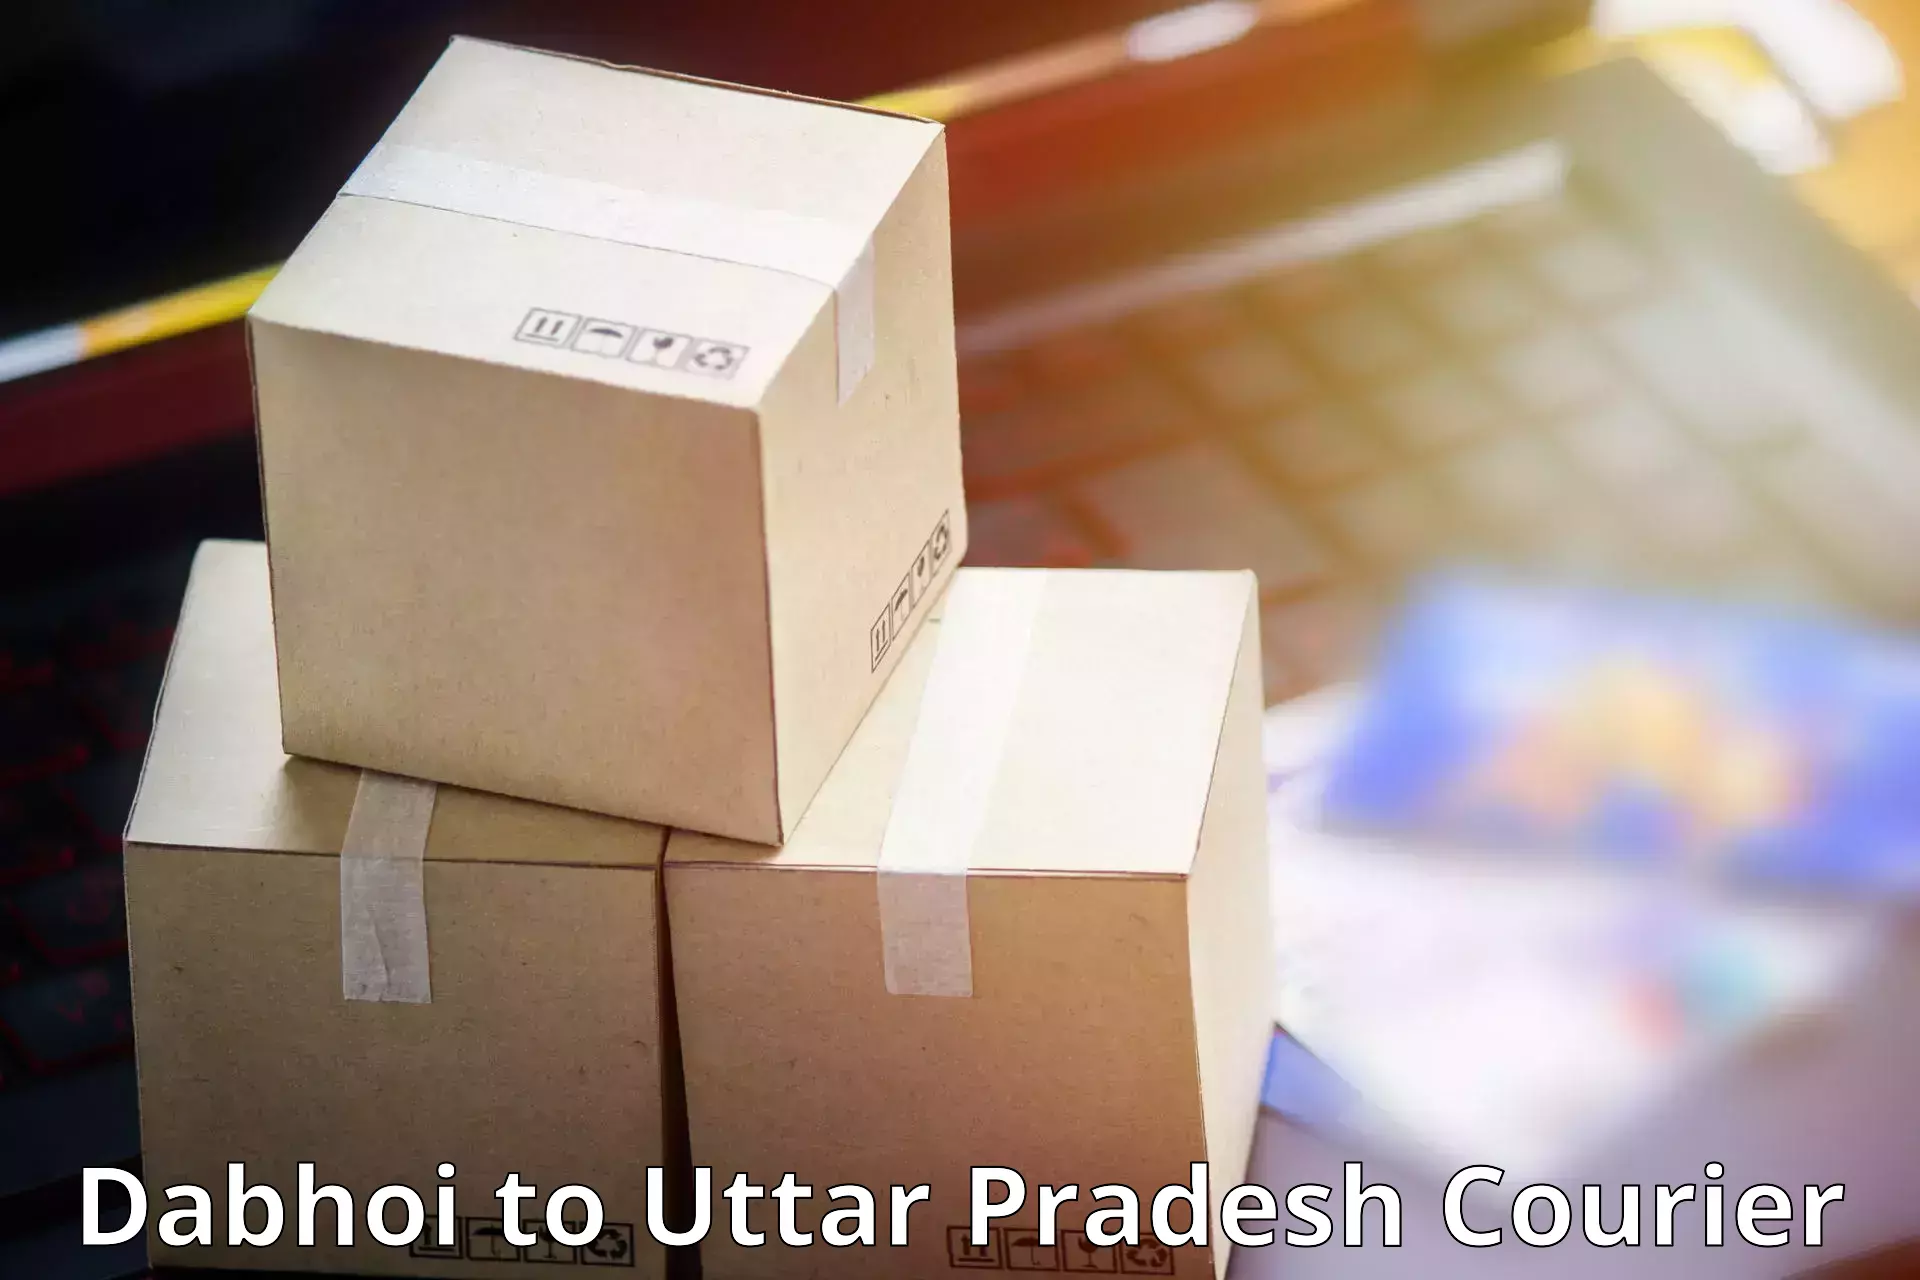 Courier service booking Dabhoi to Fatehpur